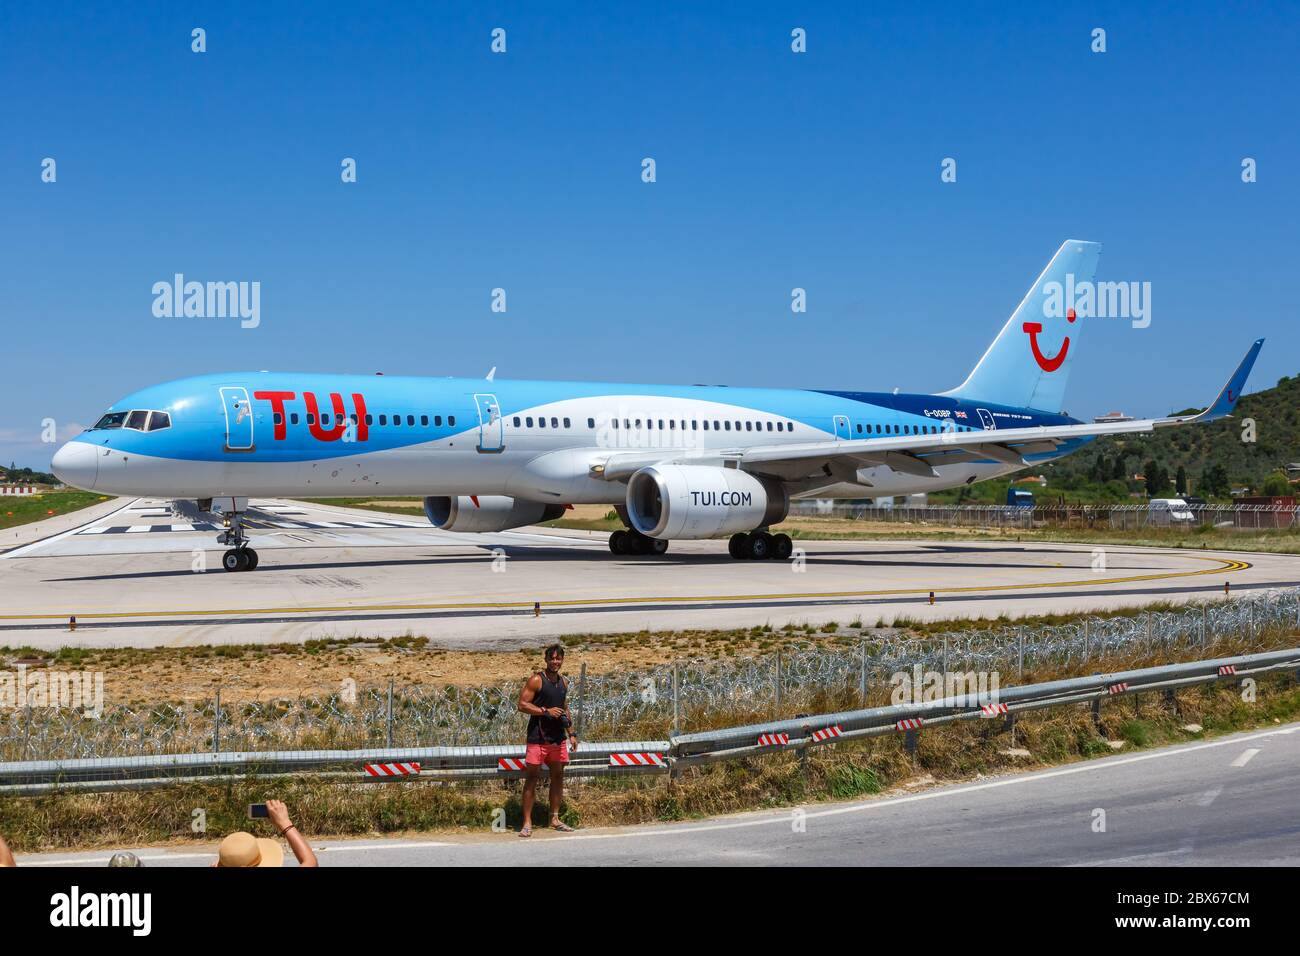 Skiathos, Greece - July 30, 2019: TUI Boeing 757-200 airplane at Skiathos airport (JSI) in Greece. Boeing is an American aircraft manufacturer headqua Stock Photo